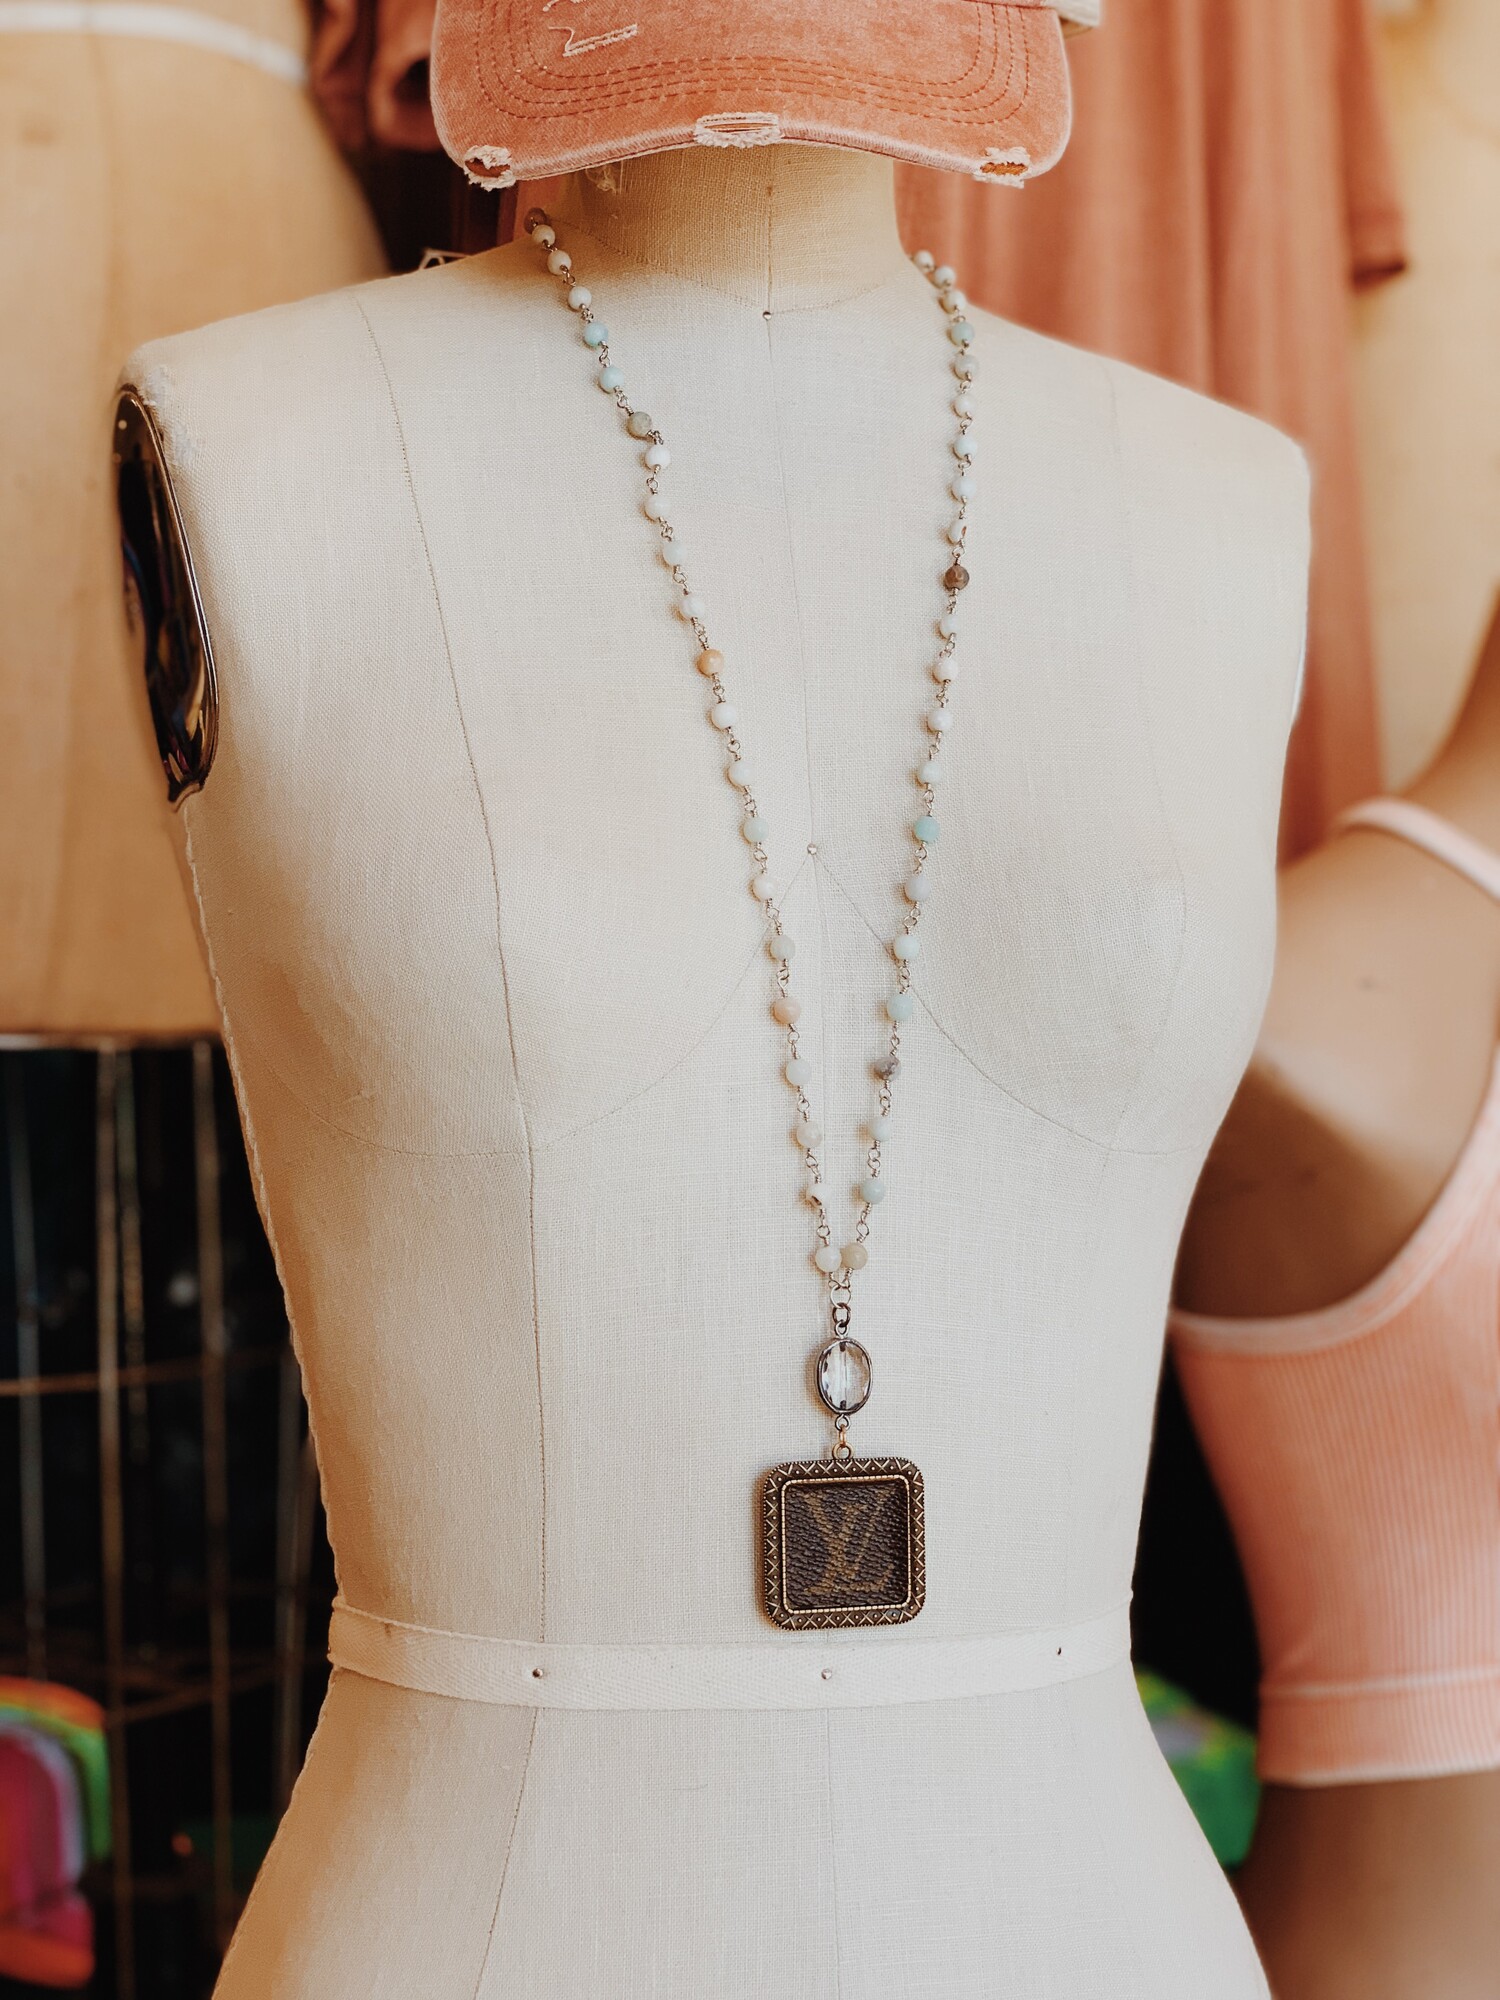 This gorgeous upcycled, handmade necklace was made from an authentic Louis Vuitton bag!

The chain measures 32 inches in length.

Resurrect Antiques is not affiliated with the LV company.
The bag's date code is SP0927